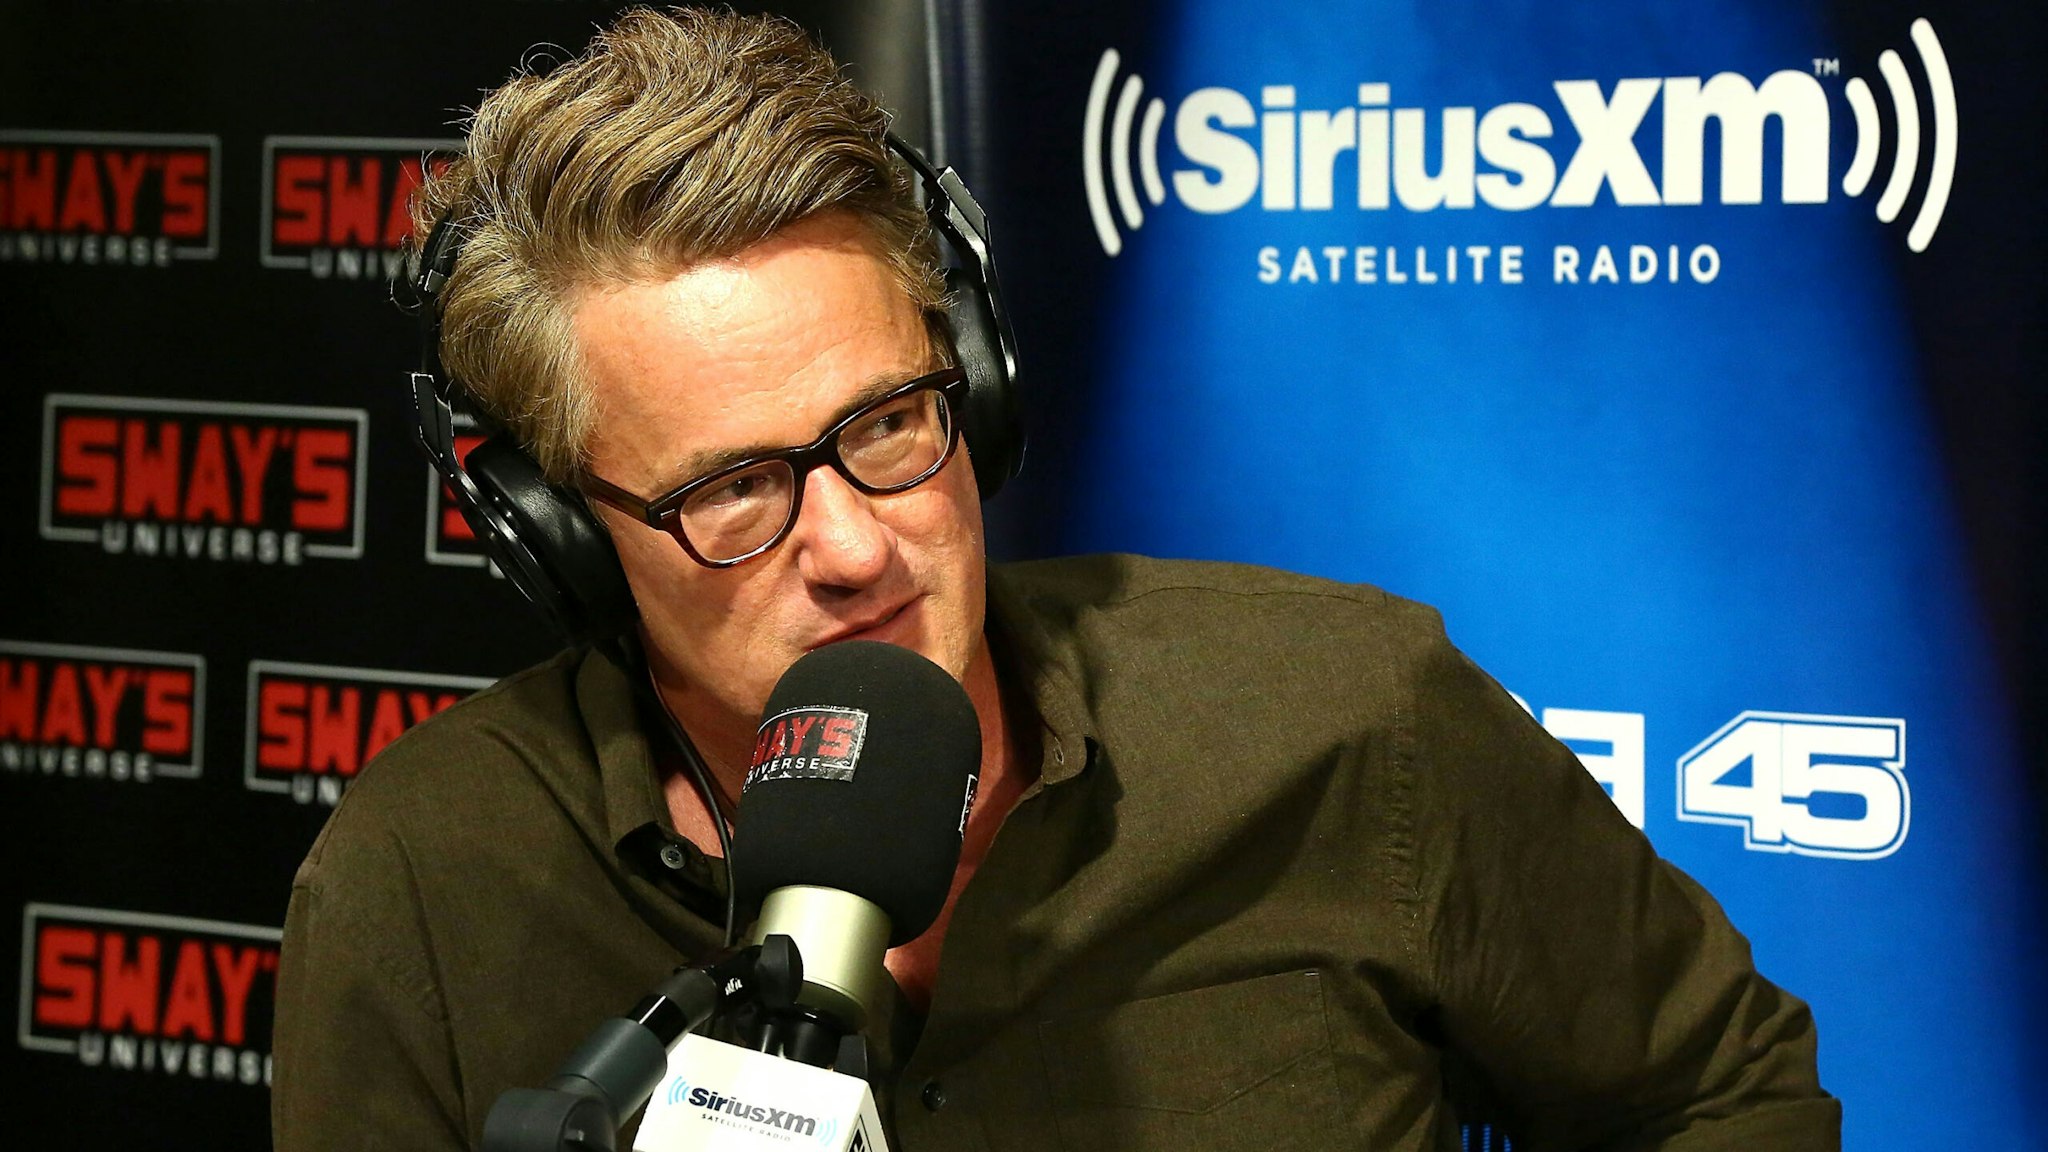 NEW YORK, NY - AUGUST 02: (EXCLUSIVE COVERAGE) Host of MSNBC's "Morning Joe", Joe Scarborough visits 'Sway in the Morning' with Sway Calloway on Eminem's Shade 45 at SiriusXM Studios on August 2, 2017 in New York City.